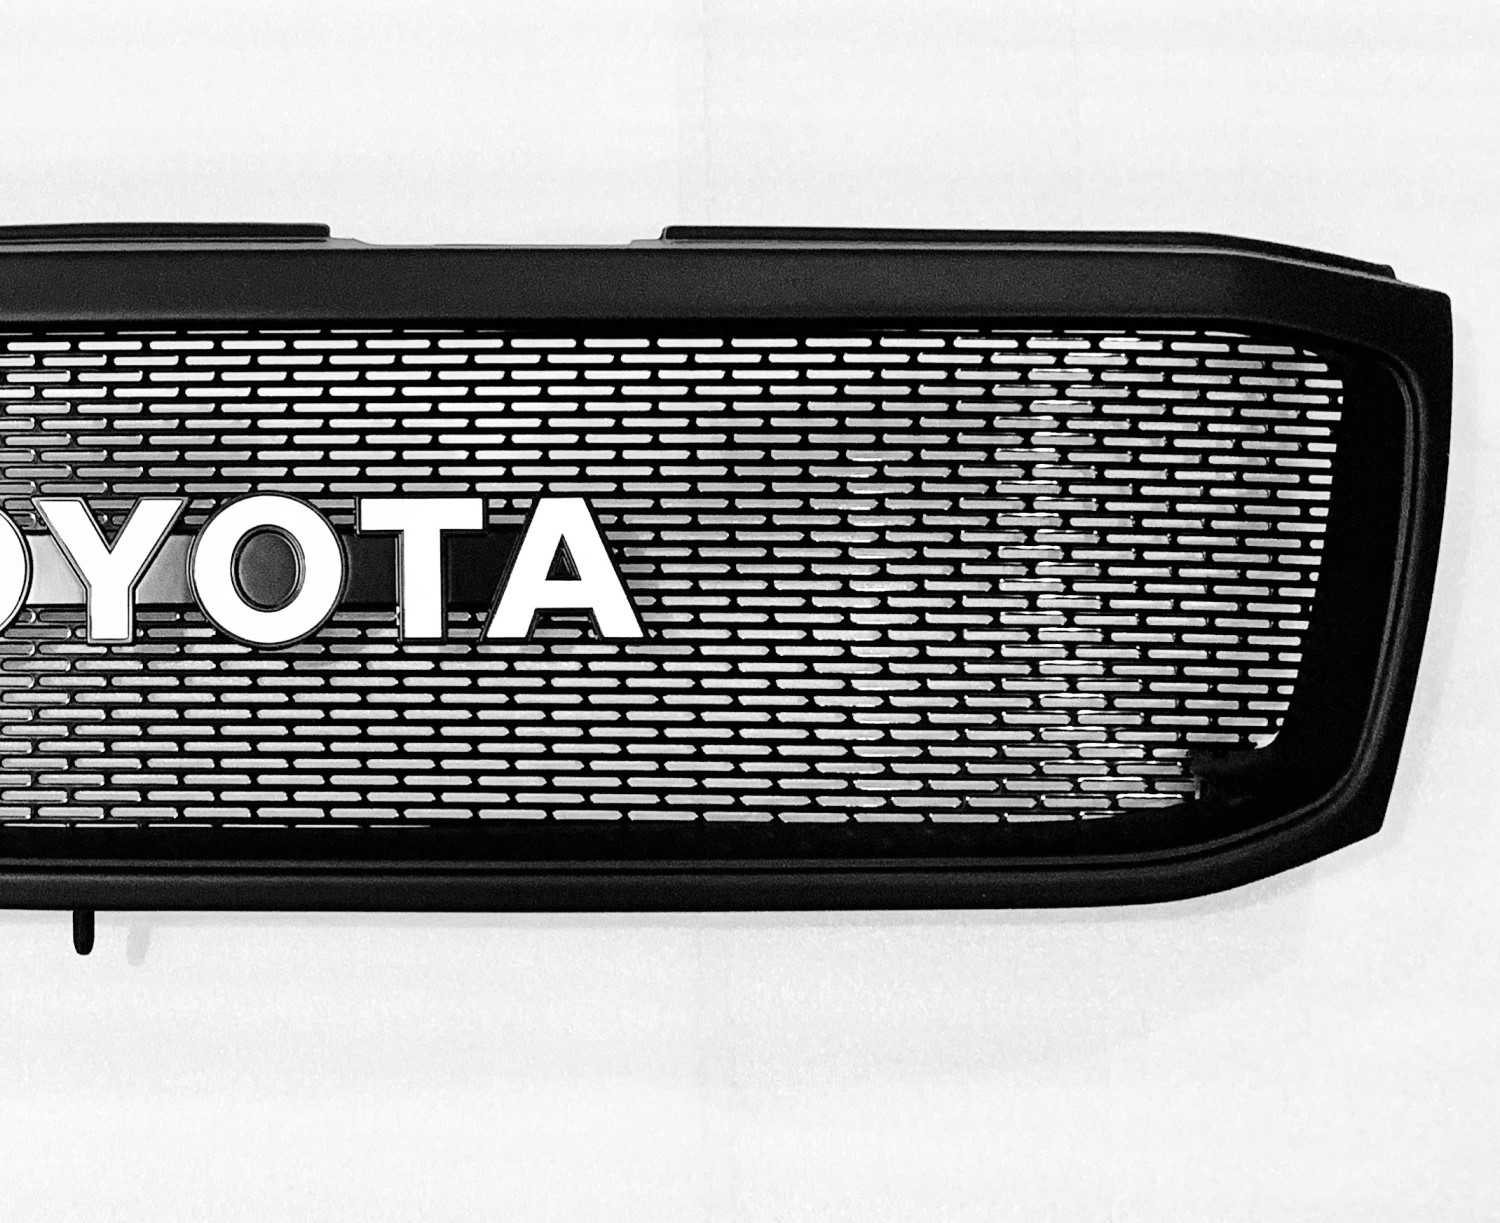 Be the First to Get It: A Sneak Peek at Our Upcoming Custom Grille for 1998-2002 Toyota Land Cruiser 100 Series